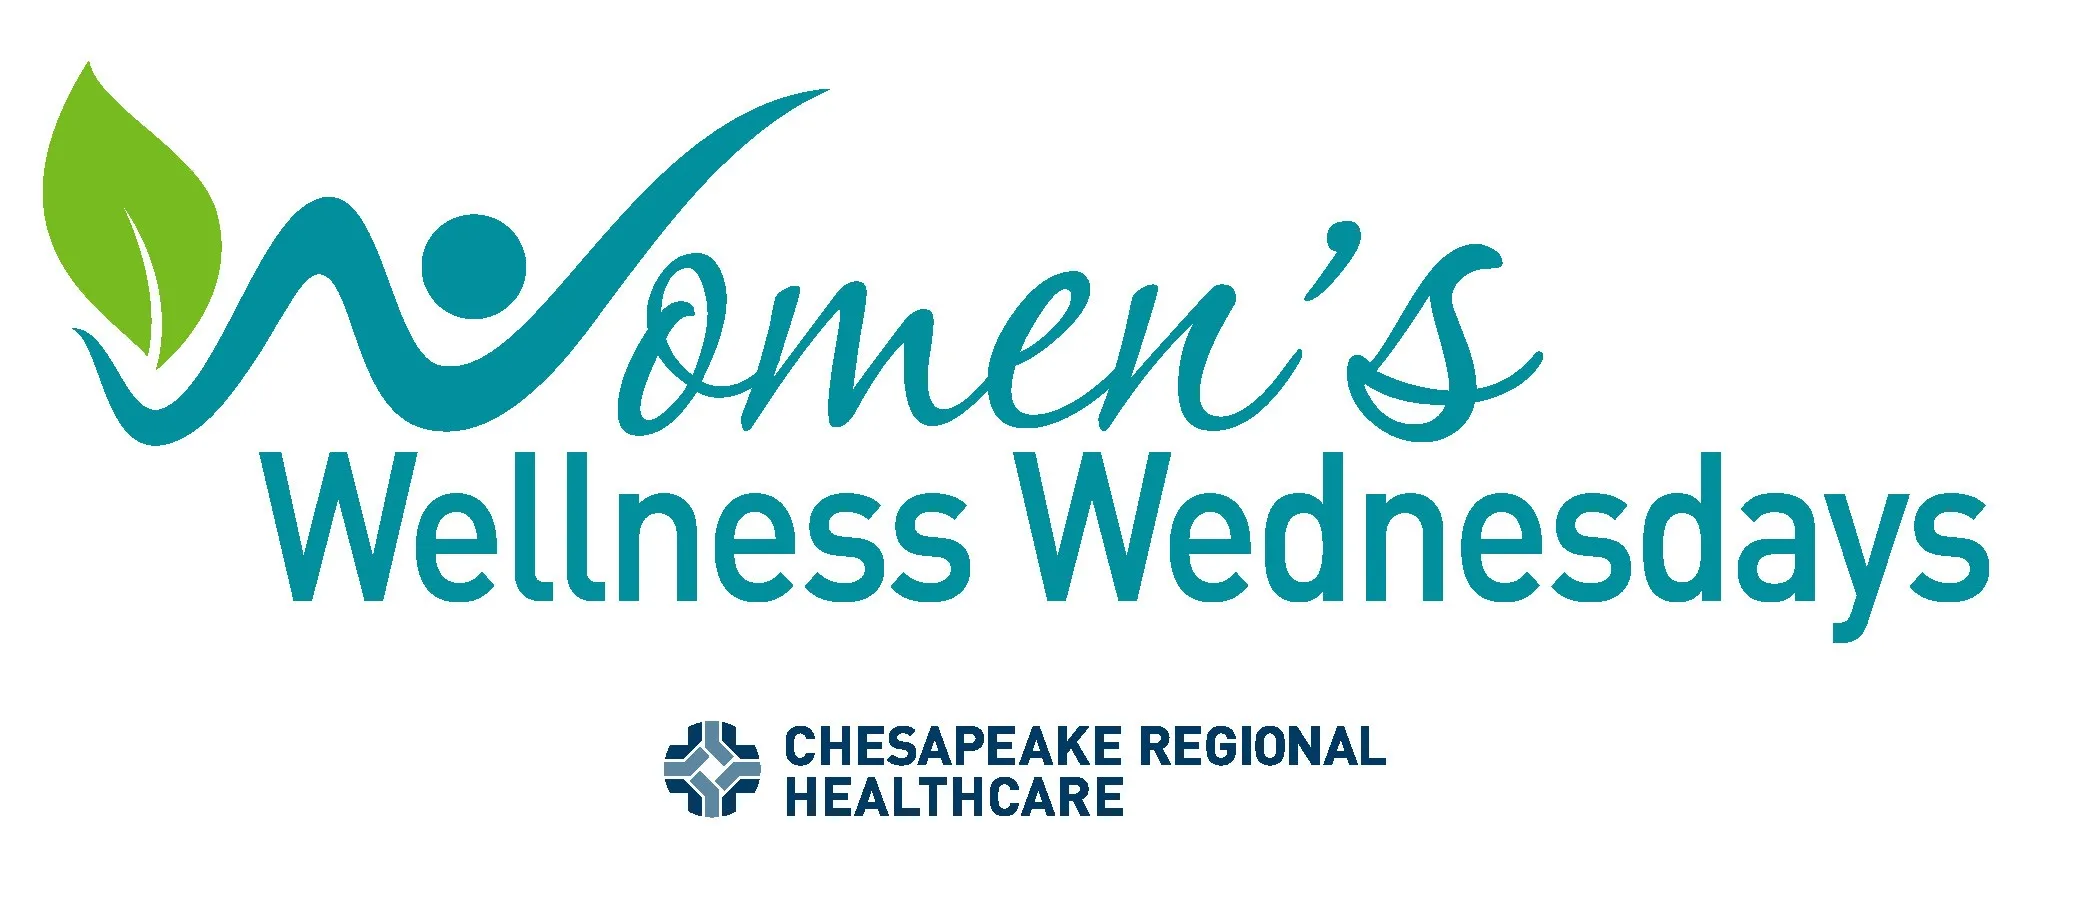 Chesapeake Regional Healthcare was named a 2022 Health Quality Innovator of the Year (showing Women's Wellness Wednesday logo)